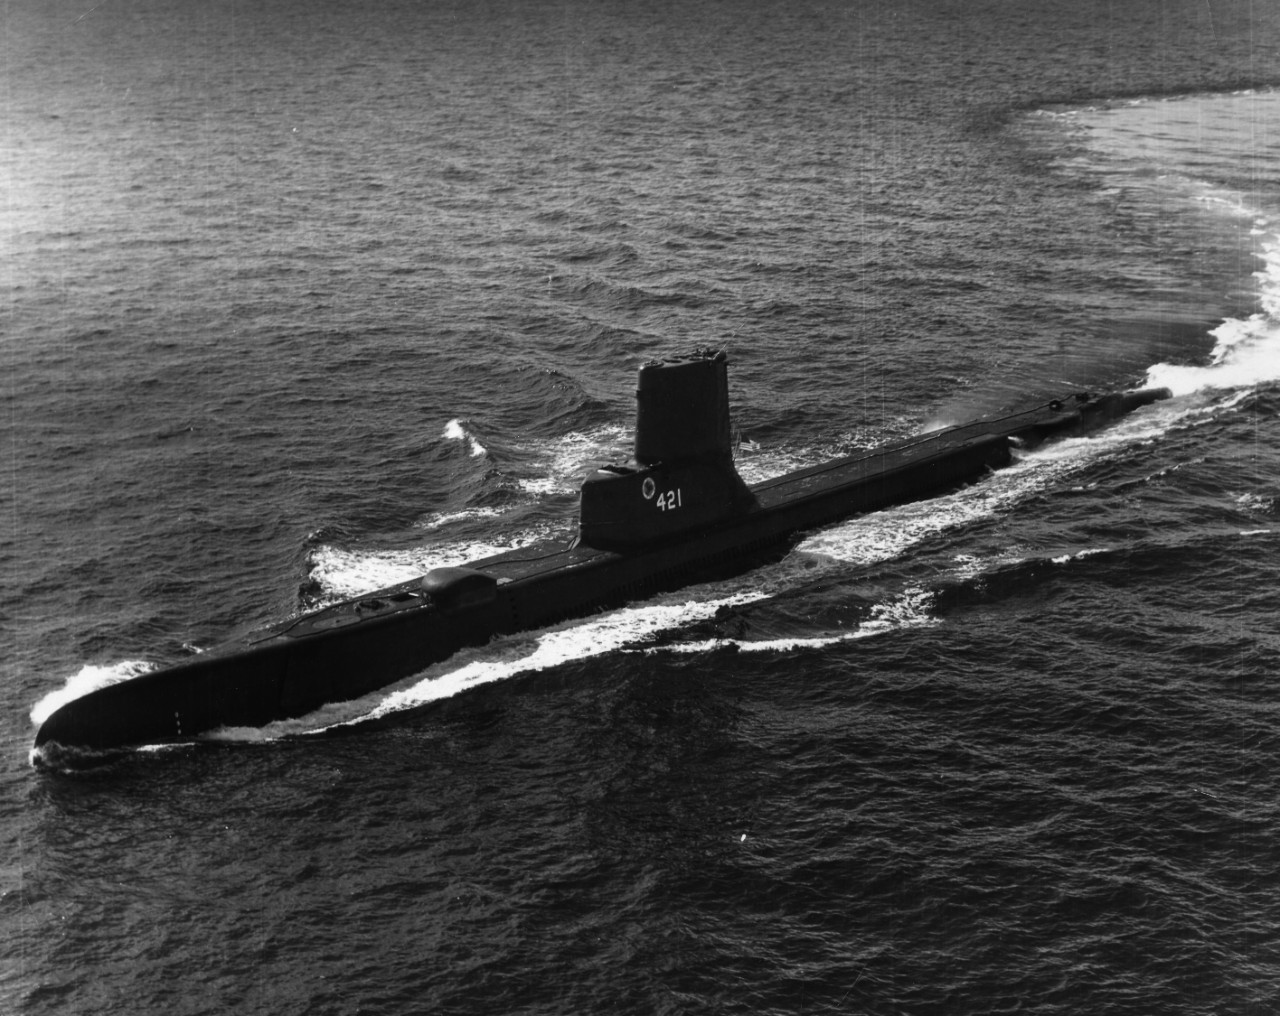 Aerial view of submarine USS Trutta (SS-421) underway on the surface